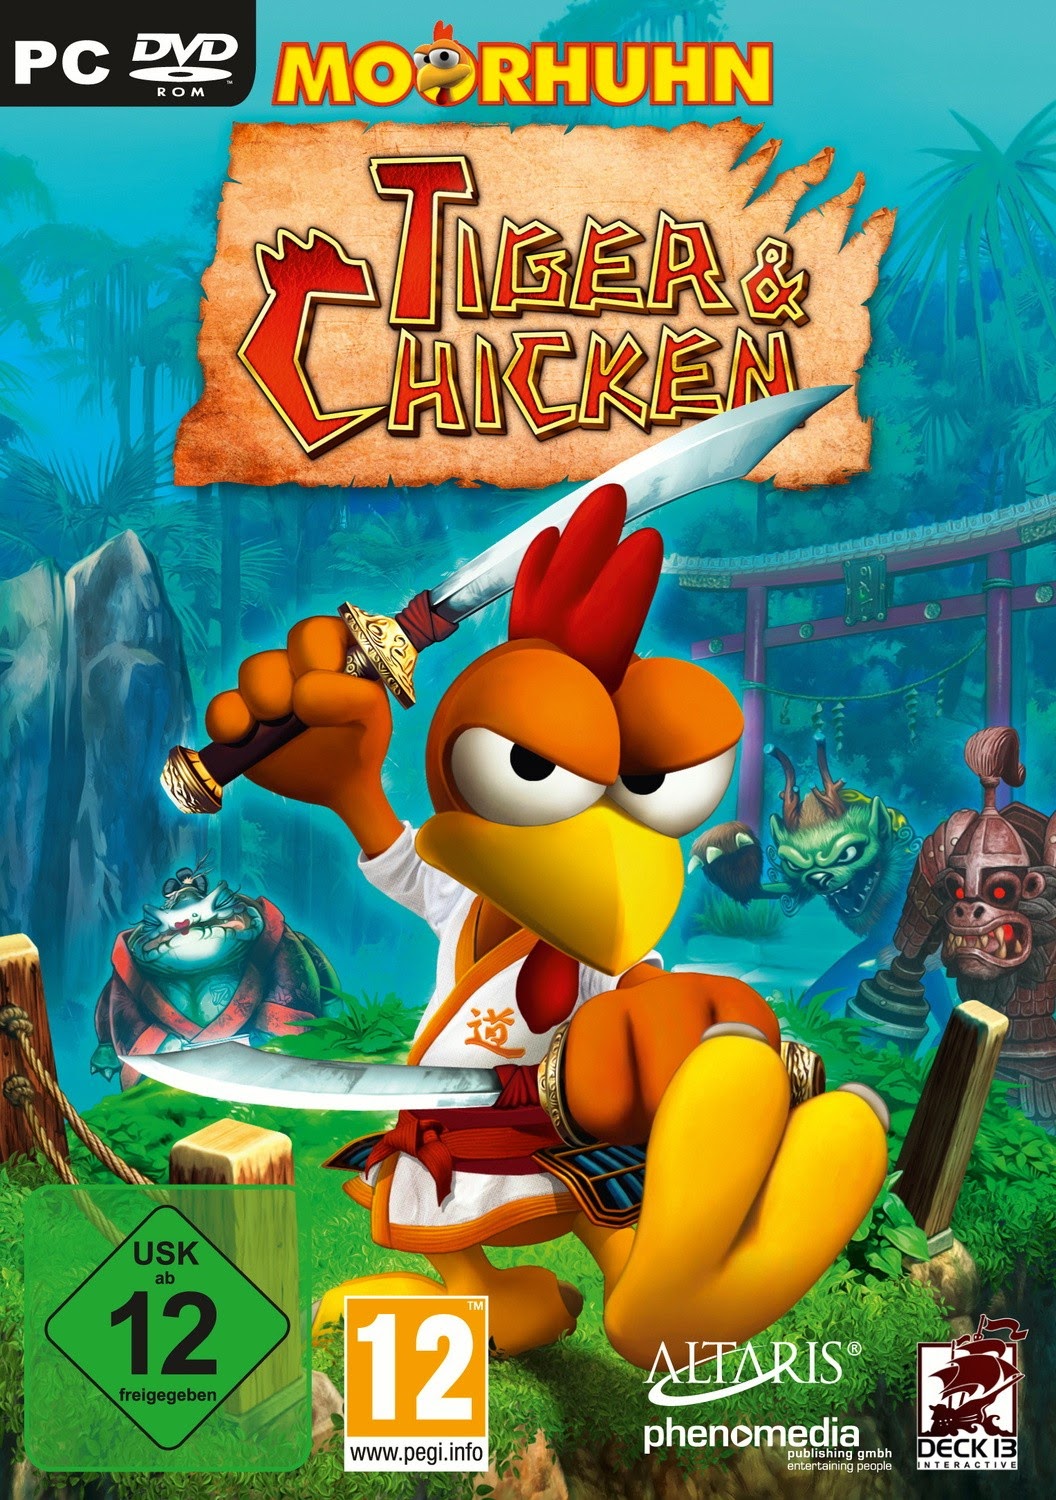 MOORHUHN TIGER AND CHICKEN PC GAME CRACK FULL DOWNLOAD